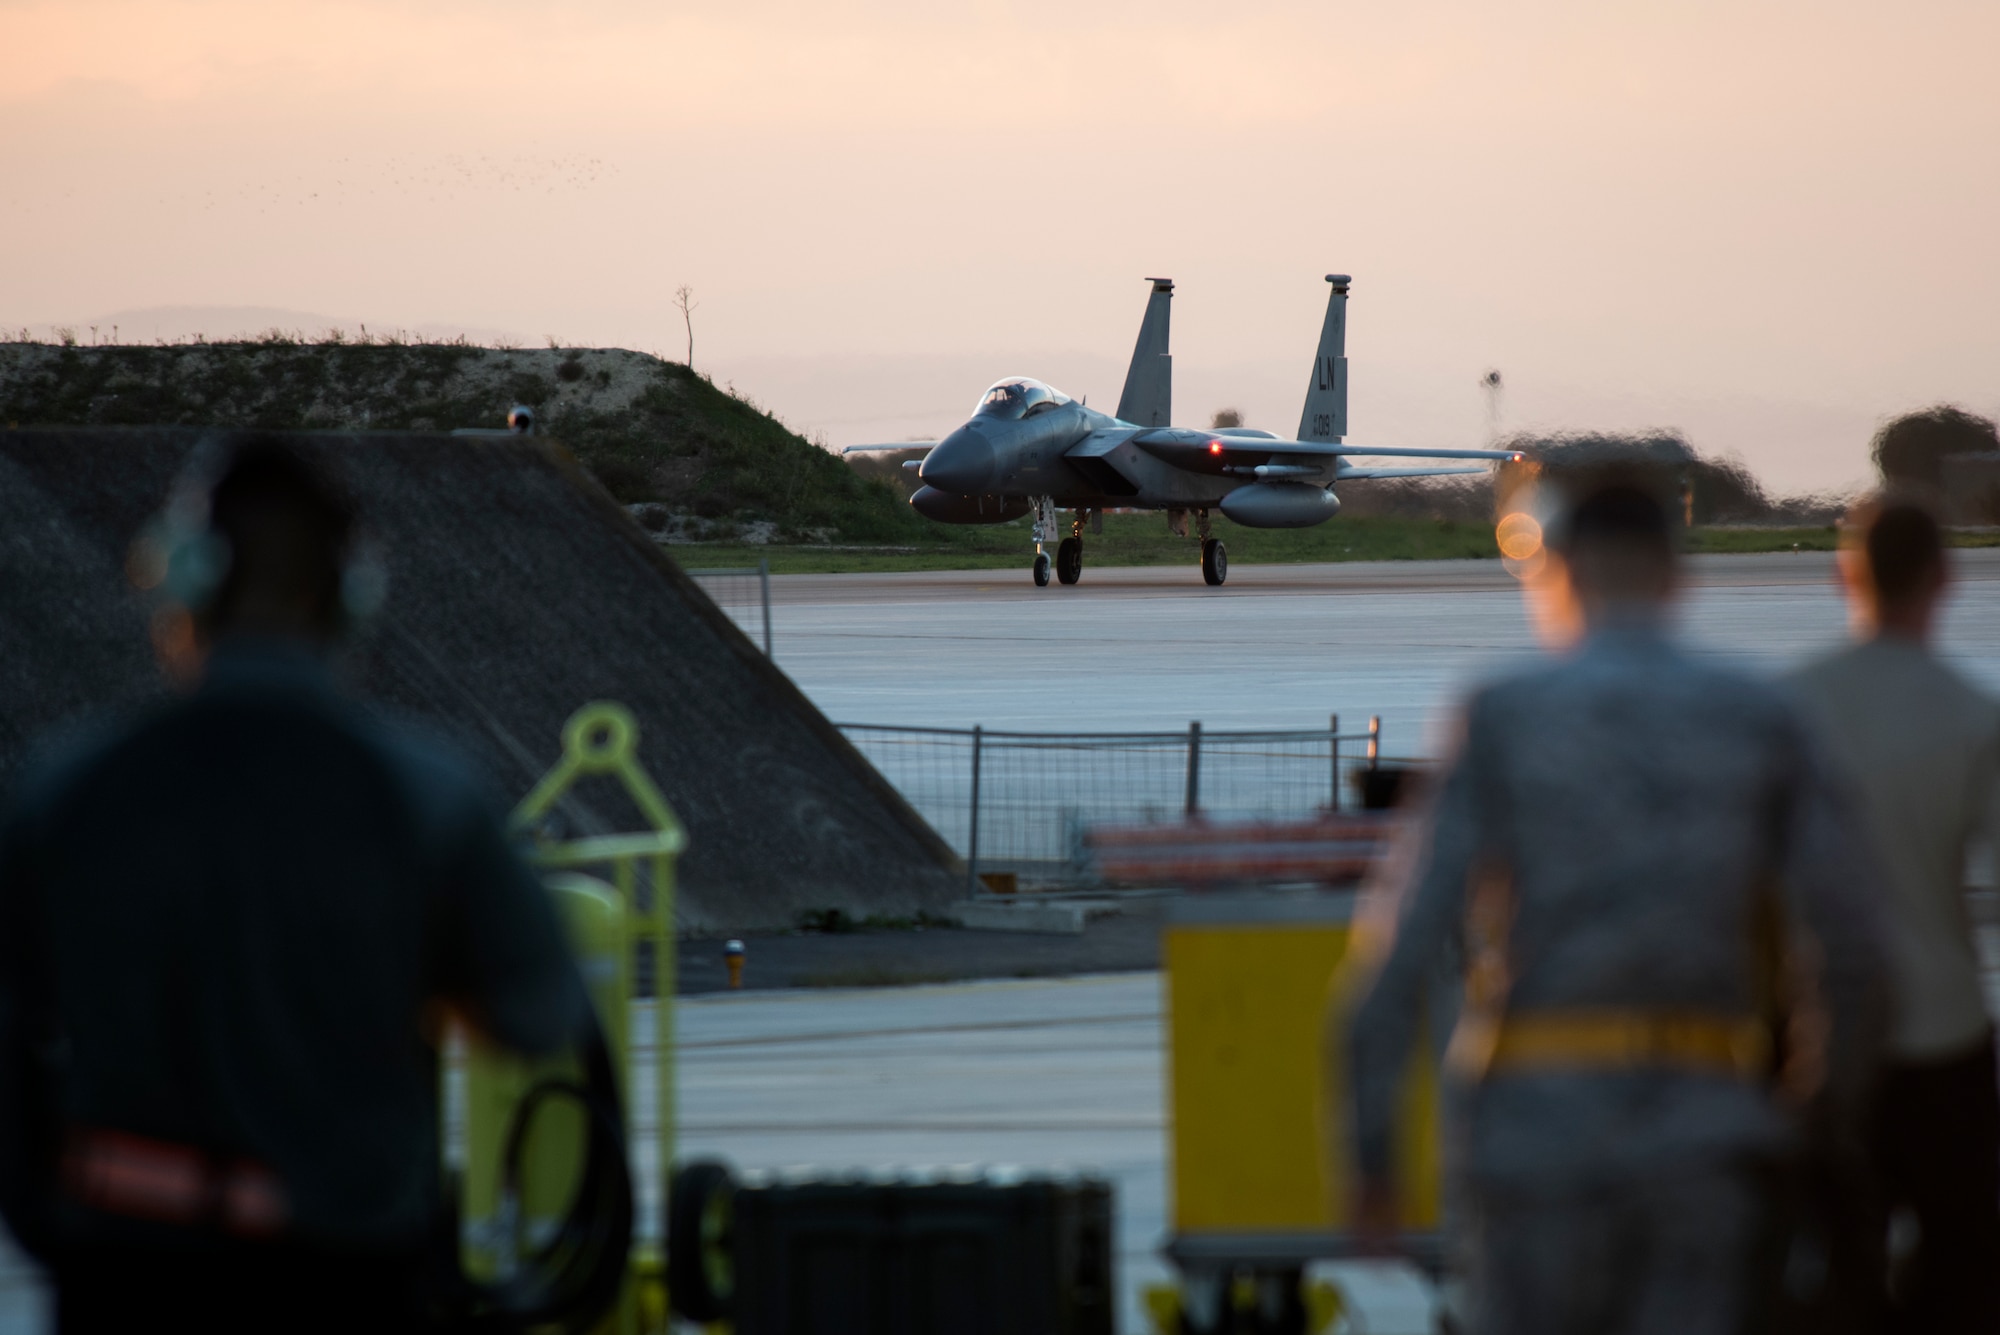 An F-15C Eagle assigned to the 493rd Fighter Squadron taxis at Amendola Air Base, Italy, Nov. 16, 2018. F-15C Eagles and an F-15D Eagle will be participating in the NATO Tactical Leadership Programme 18-4. TLP has prepared hundreds of NATO and allied forces’ flight leaders to be mission commanders. (U.S. Air Force photo/ Senior Airman Malcolm Mayfield)